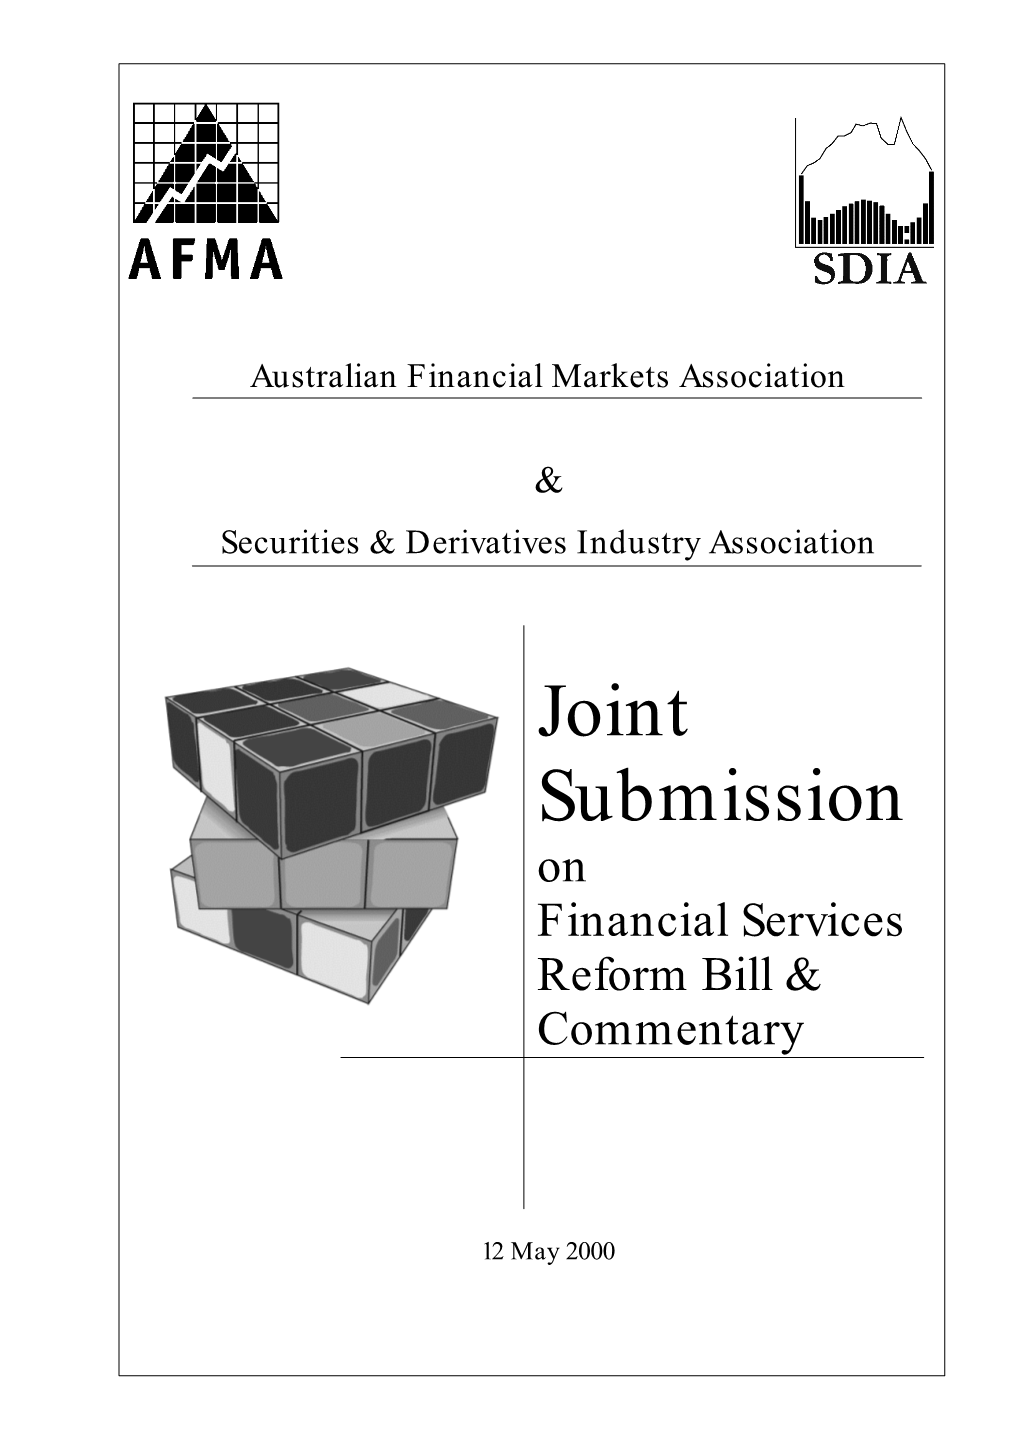 Submission on Financial Services Reform Bill & Commentary